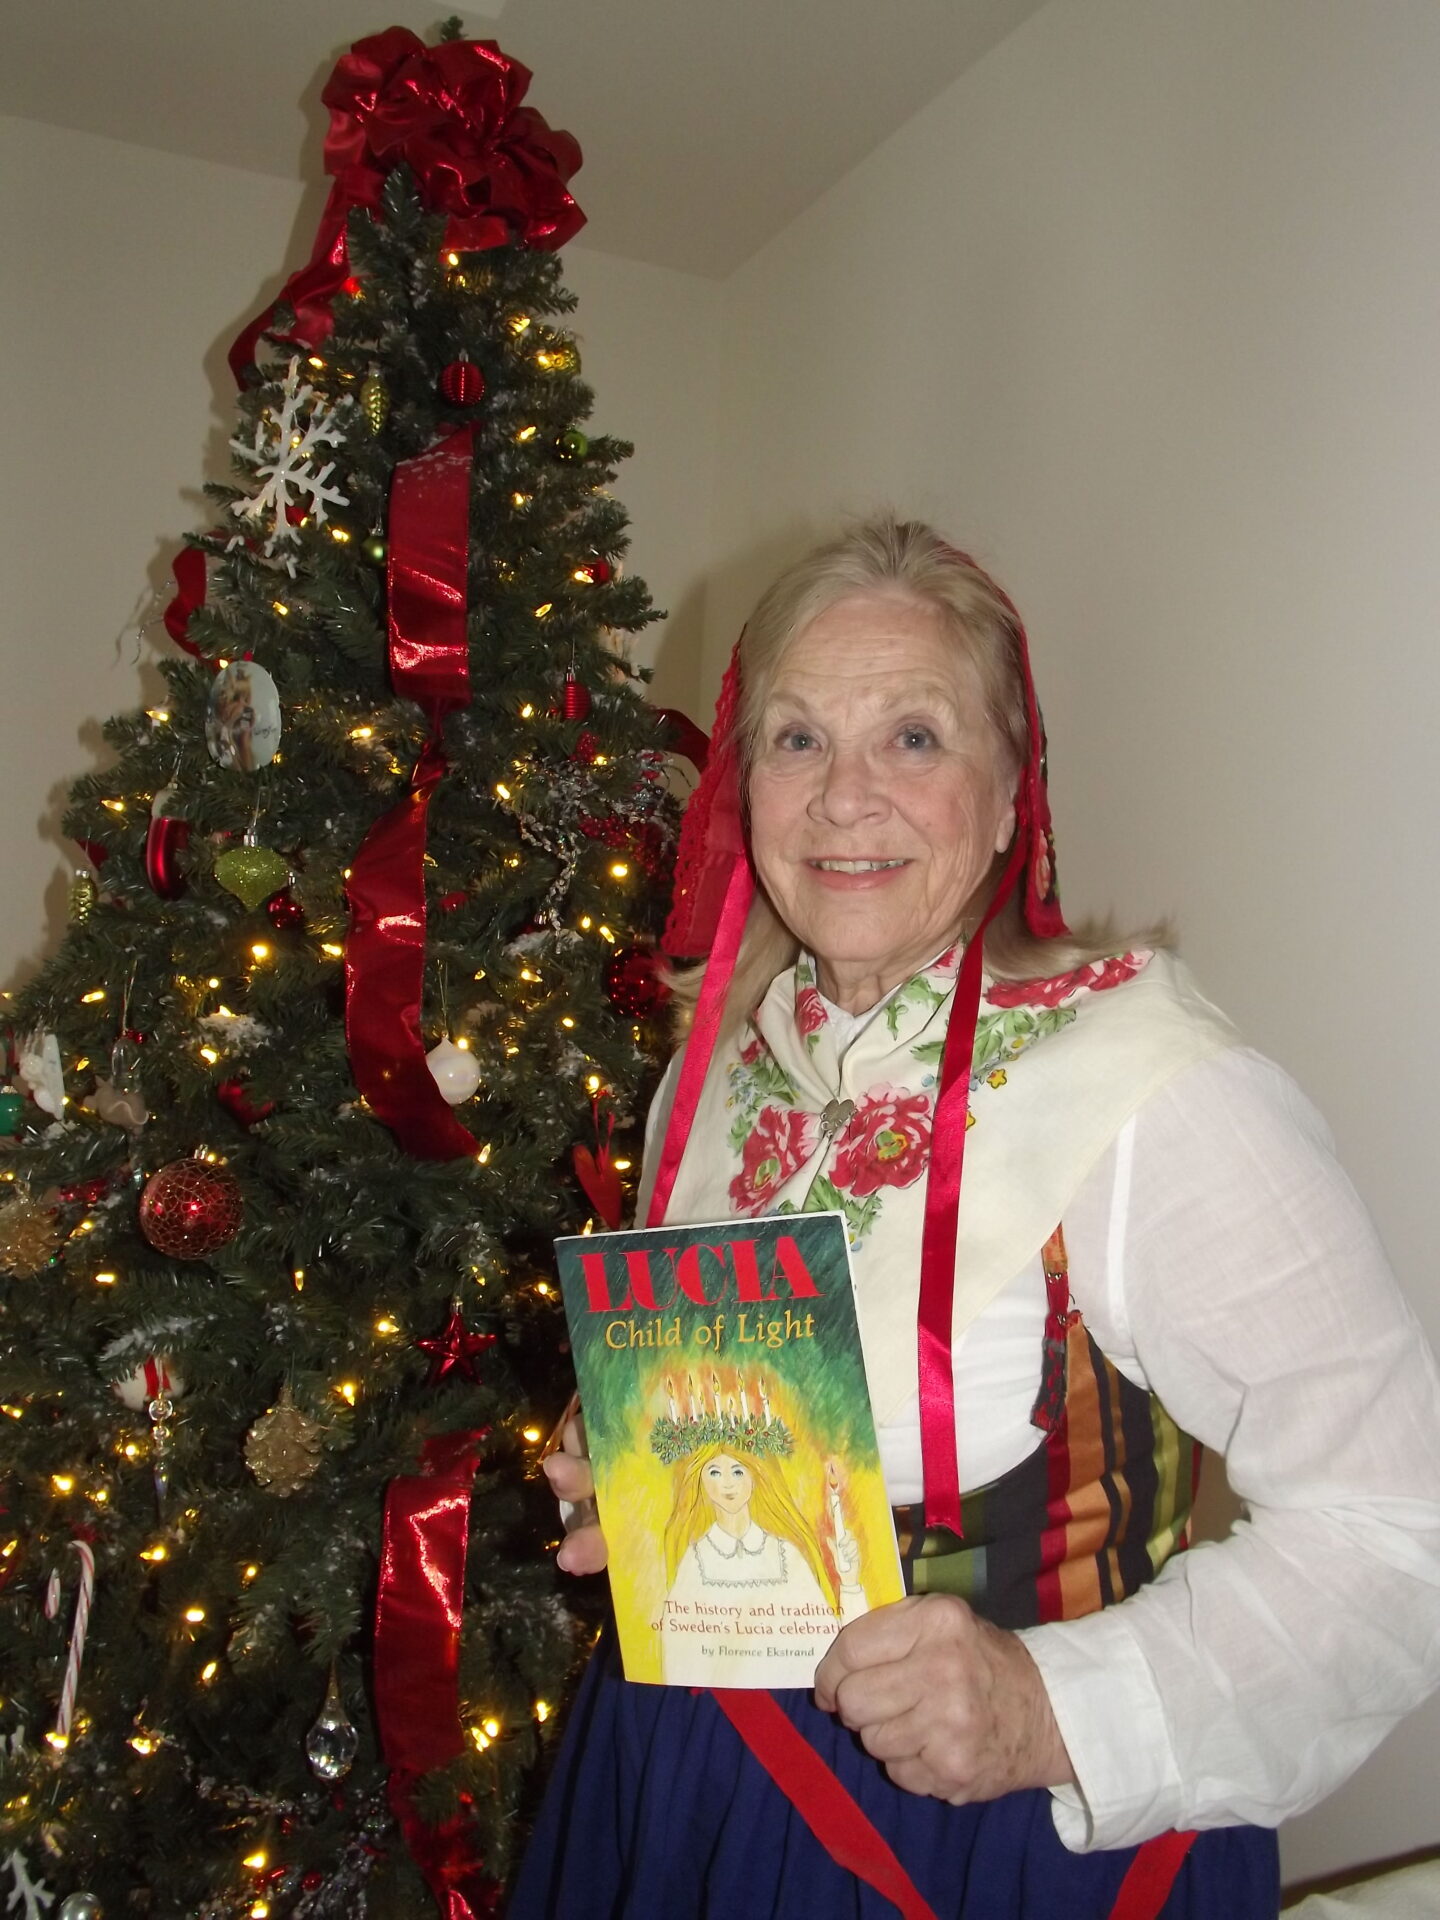 A woman holding a book in front of a christmas tree.